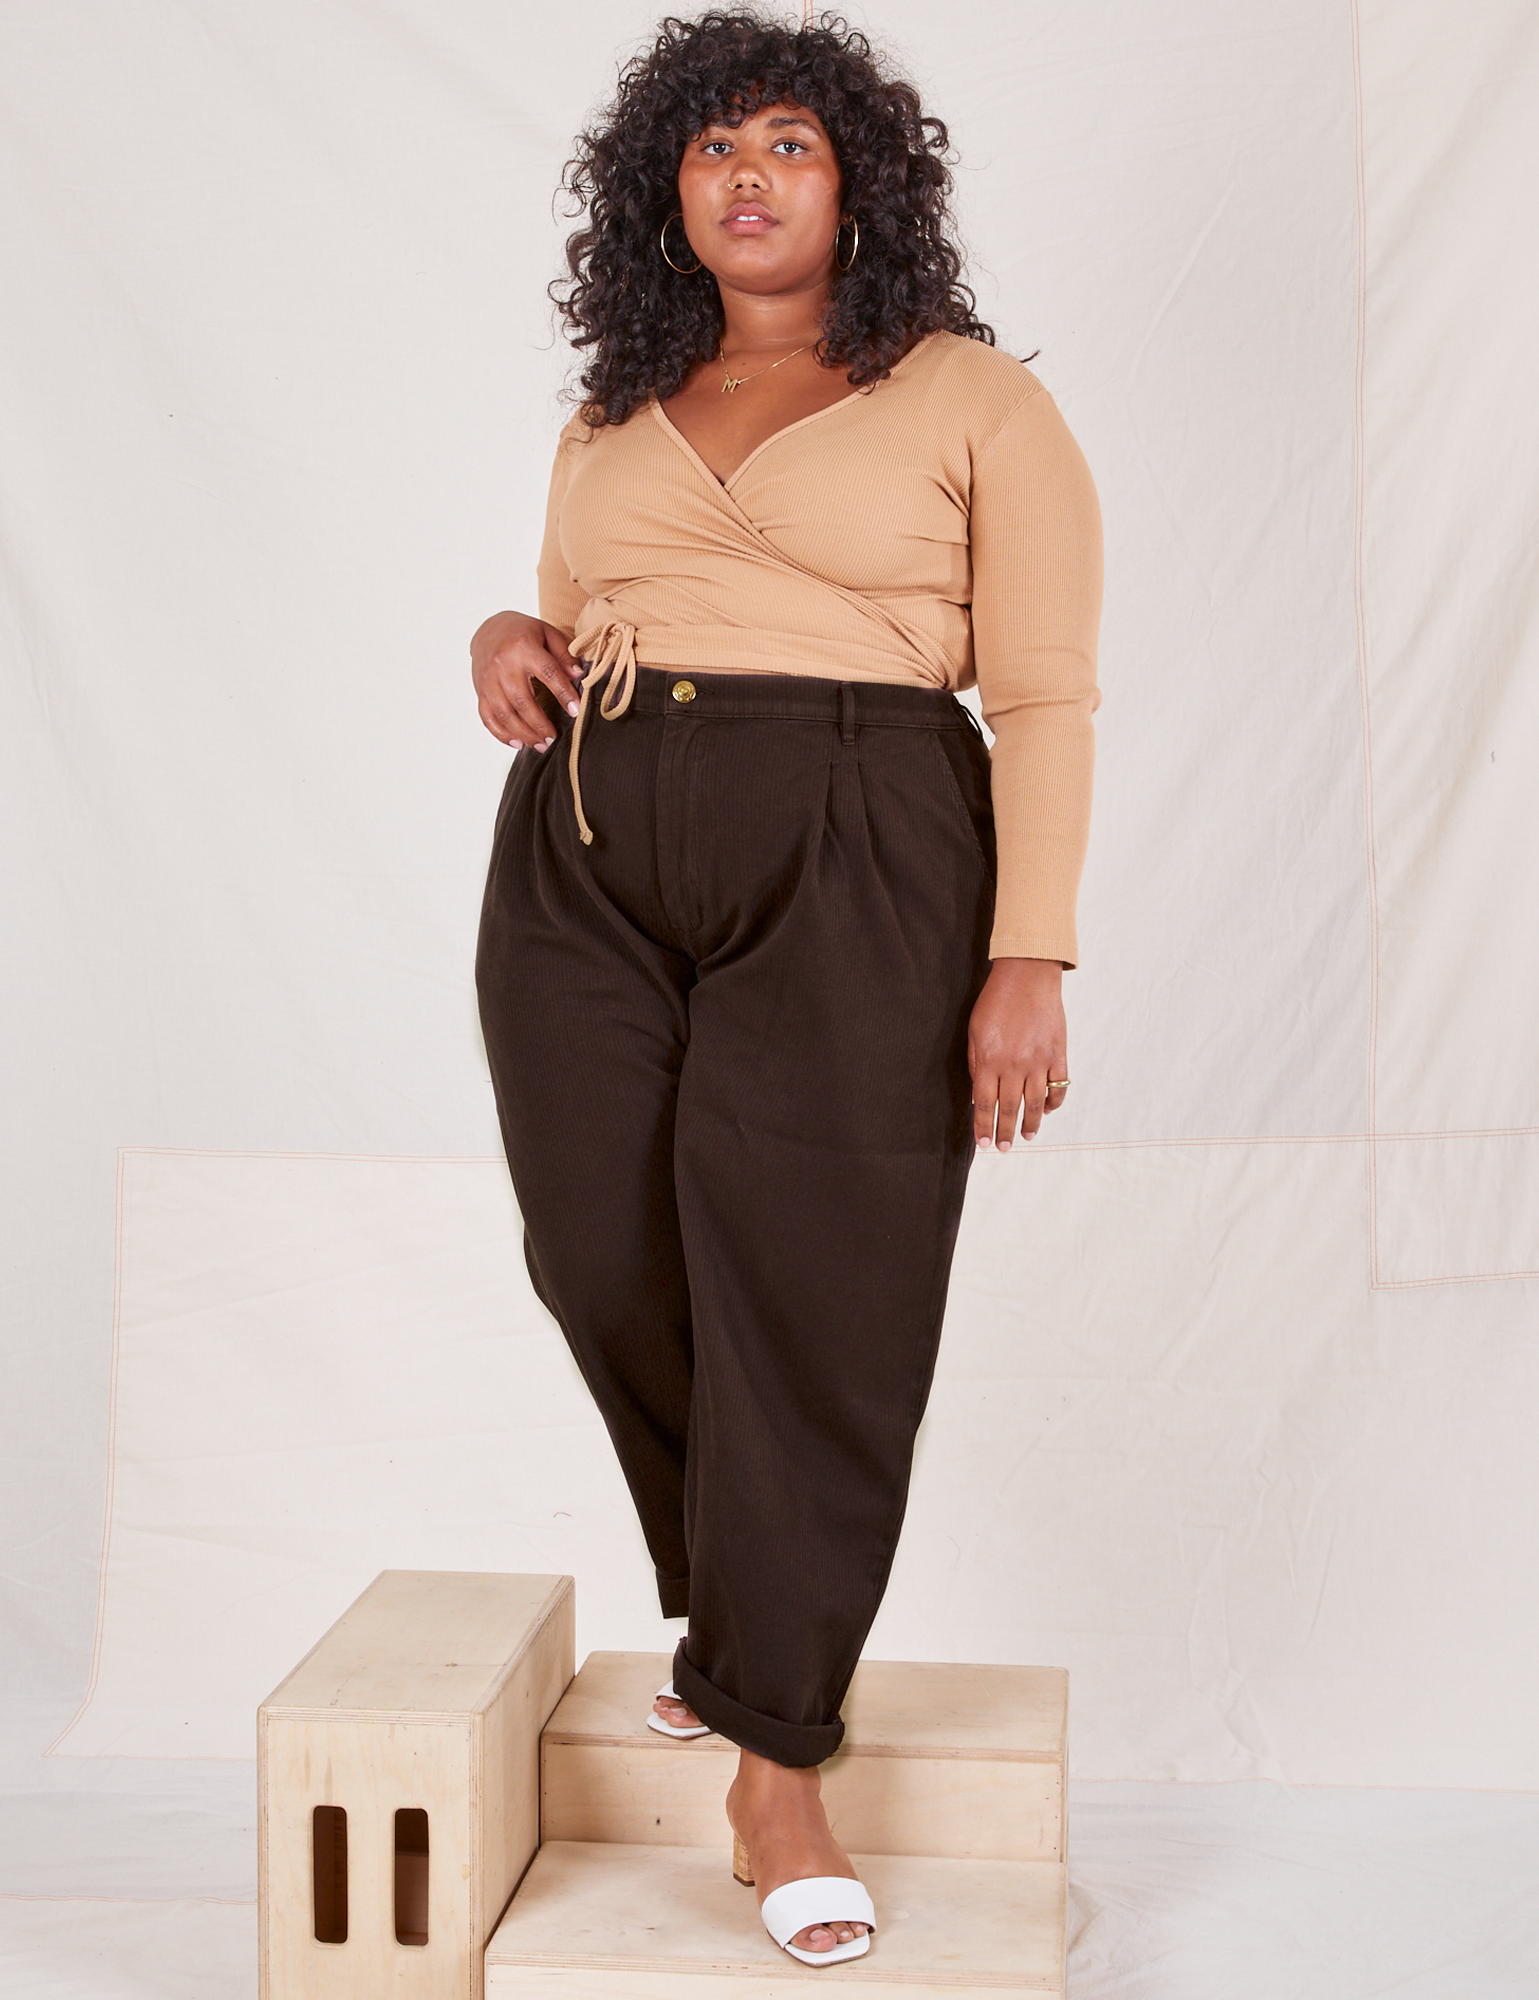 Morgan is 5&#39;5&quot; and wearing 1XL Heritage Trousers in Espresso Brown paired with tan Wrap Top